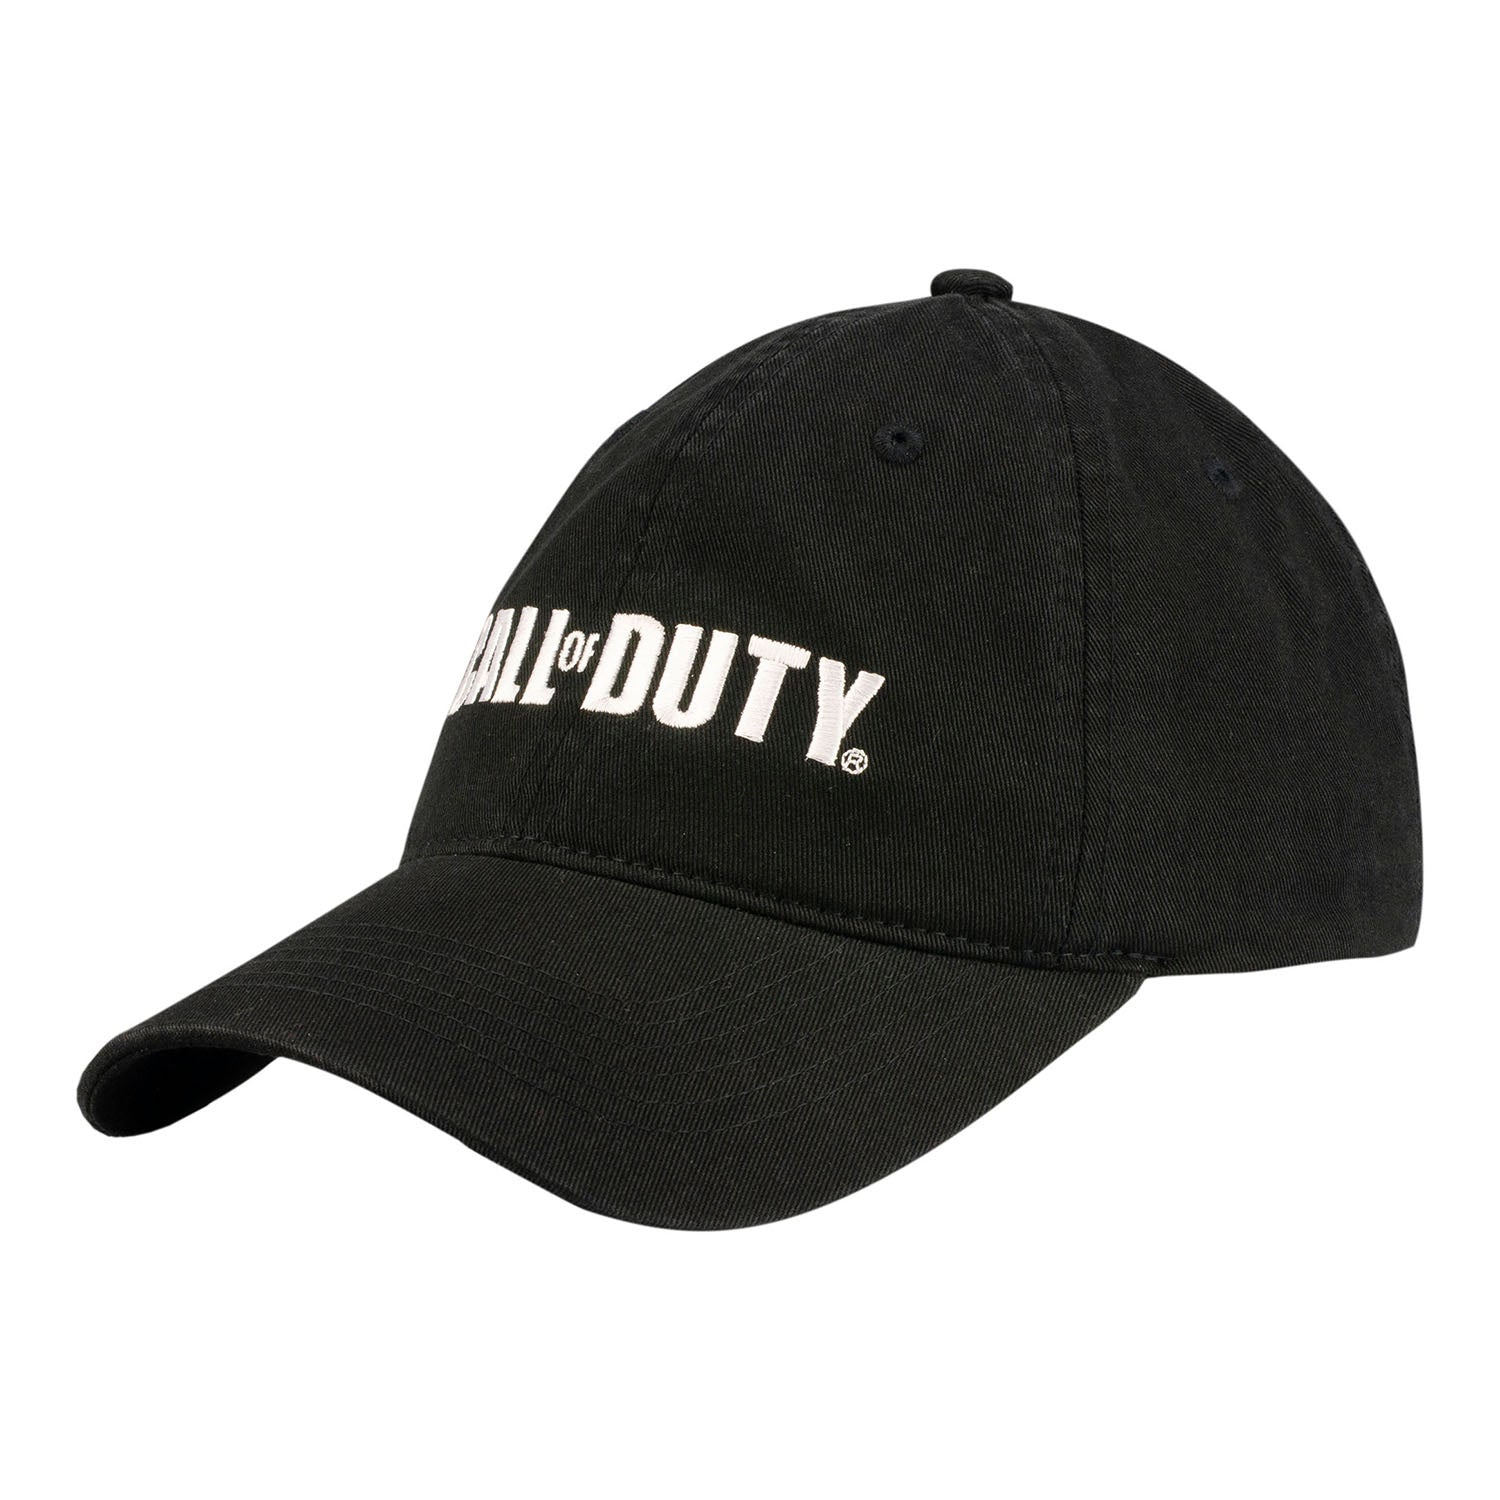 Call of Duty Black Logo Hat - Left View